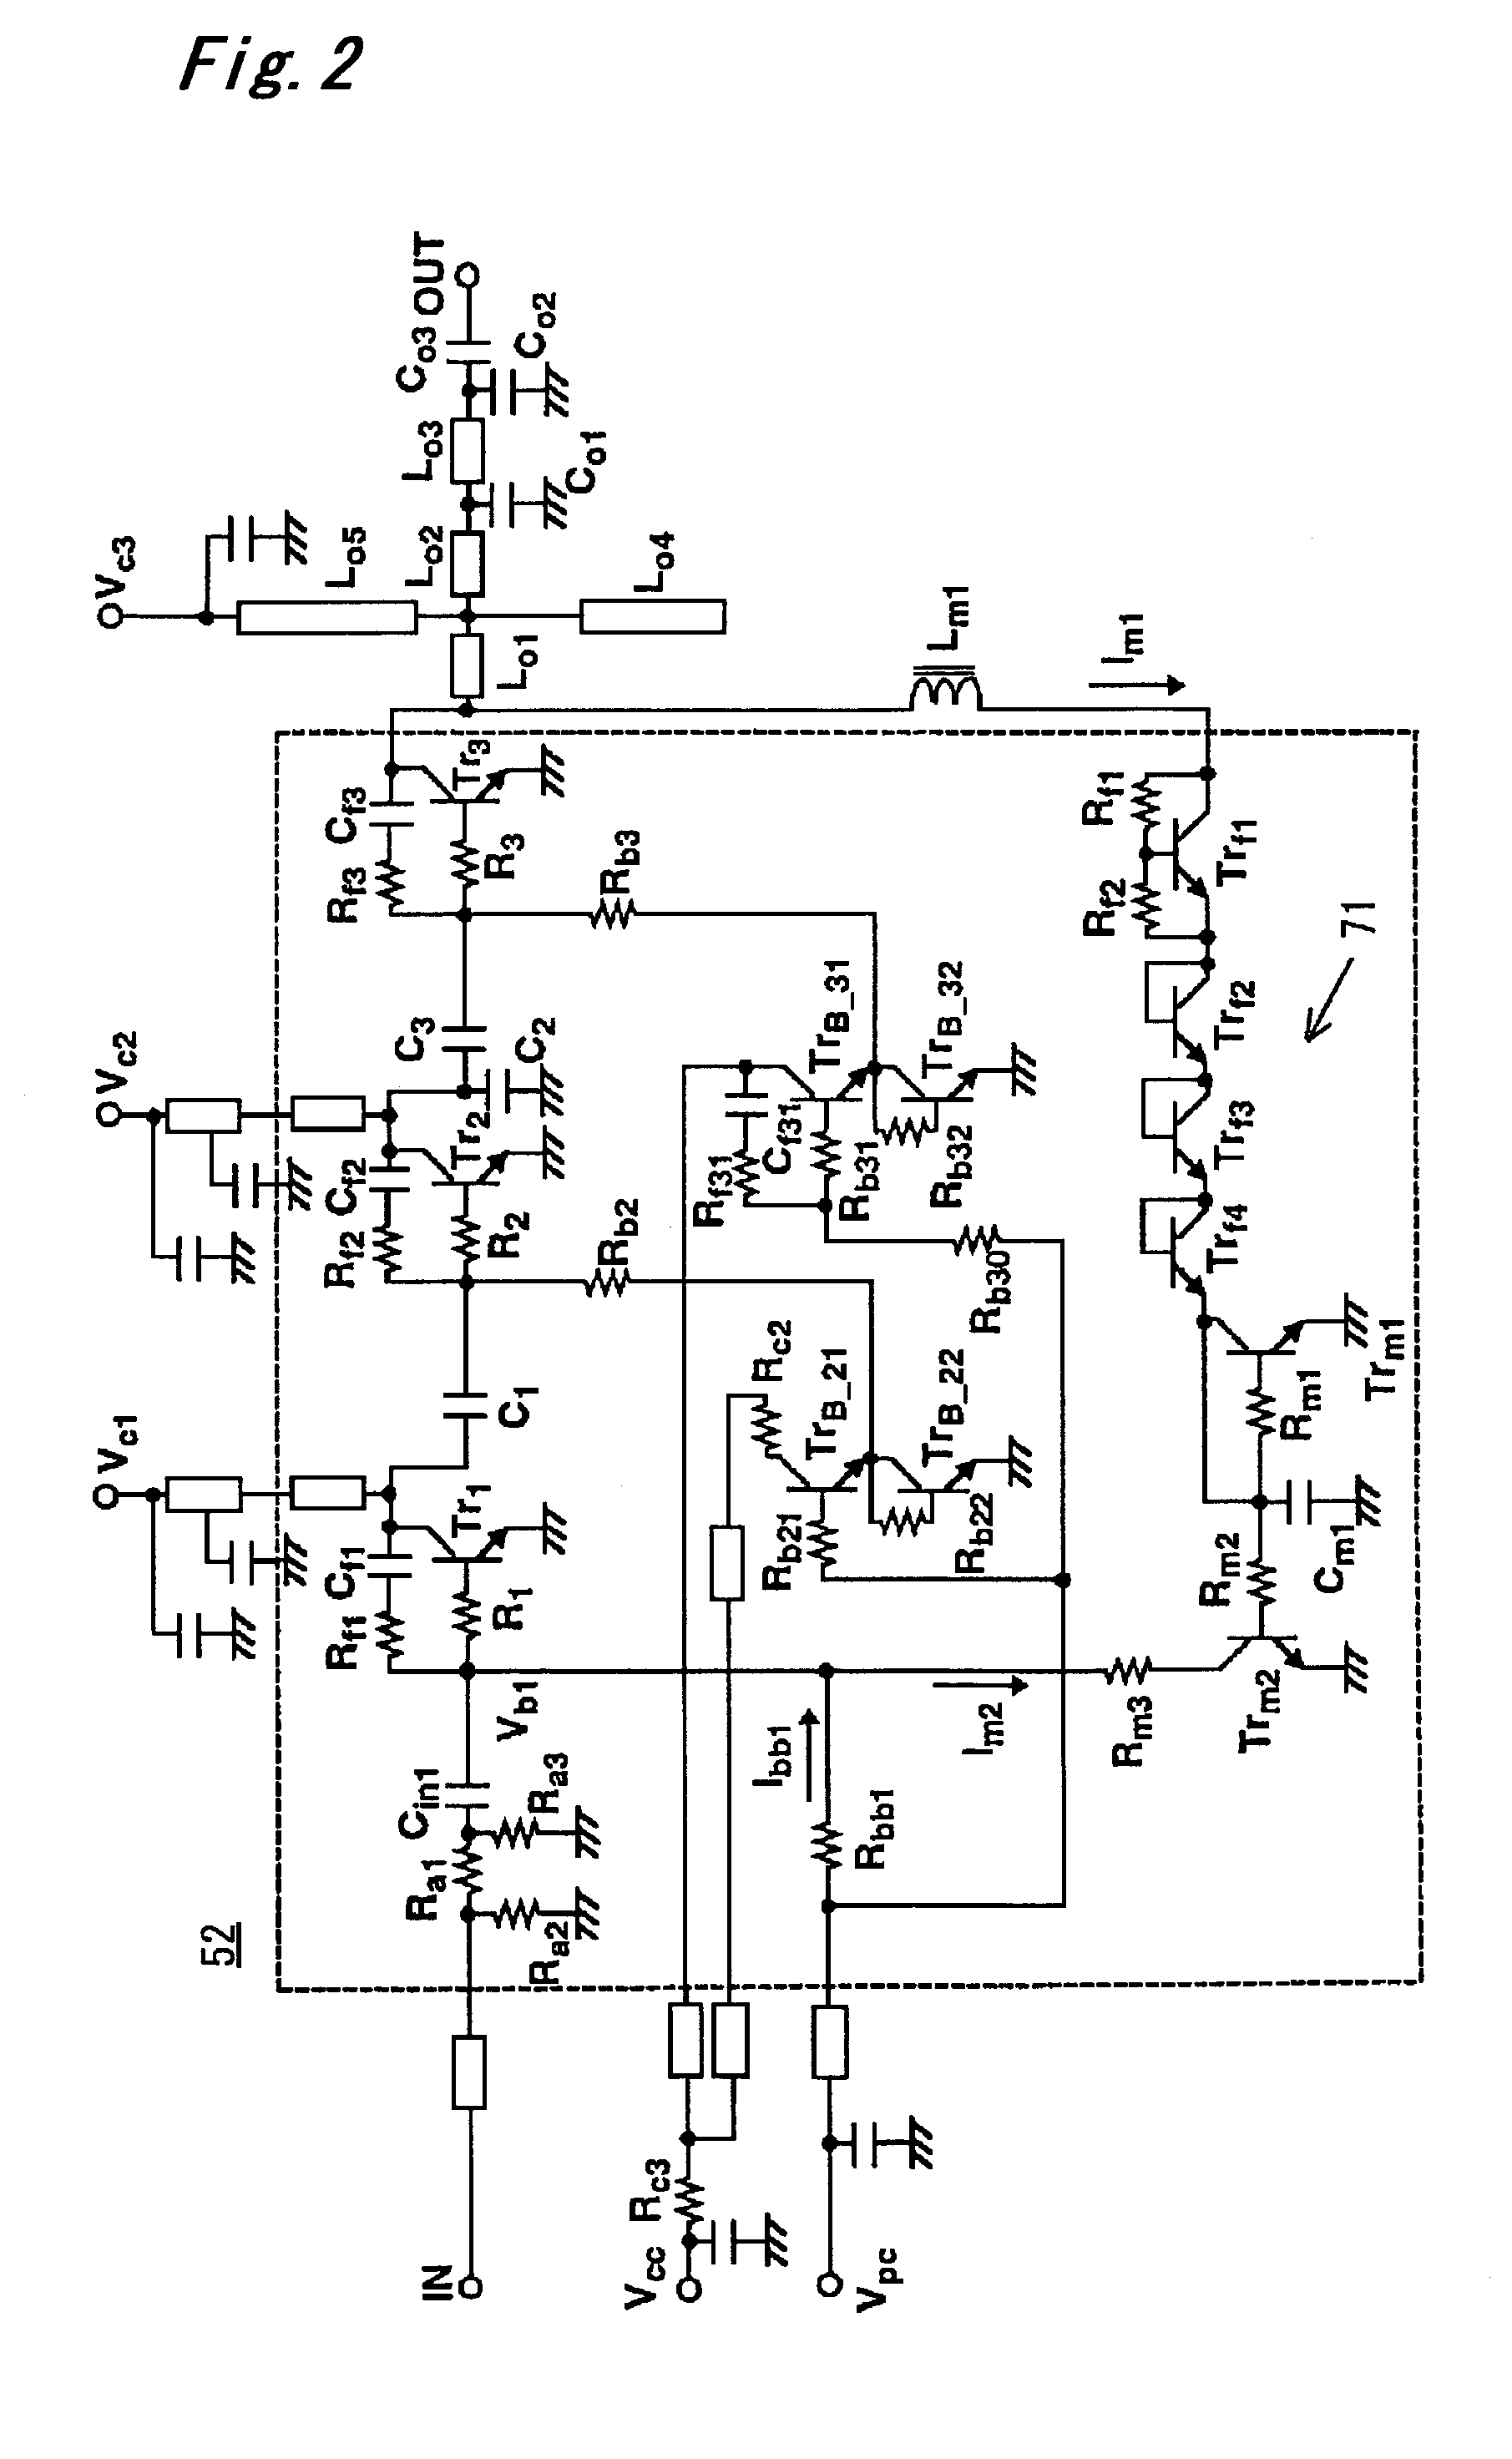 Output overvoltage protection circuit for power amplifier